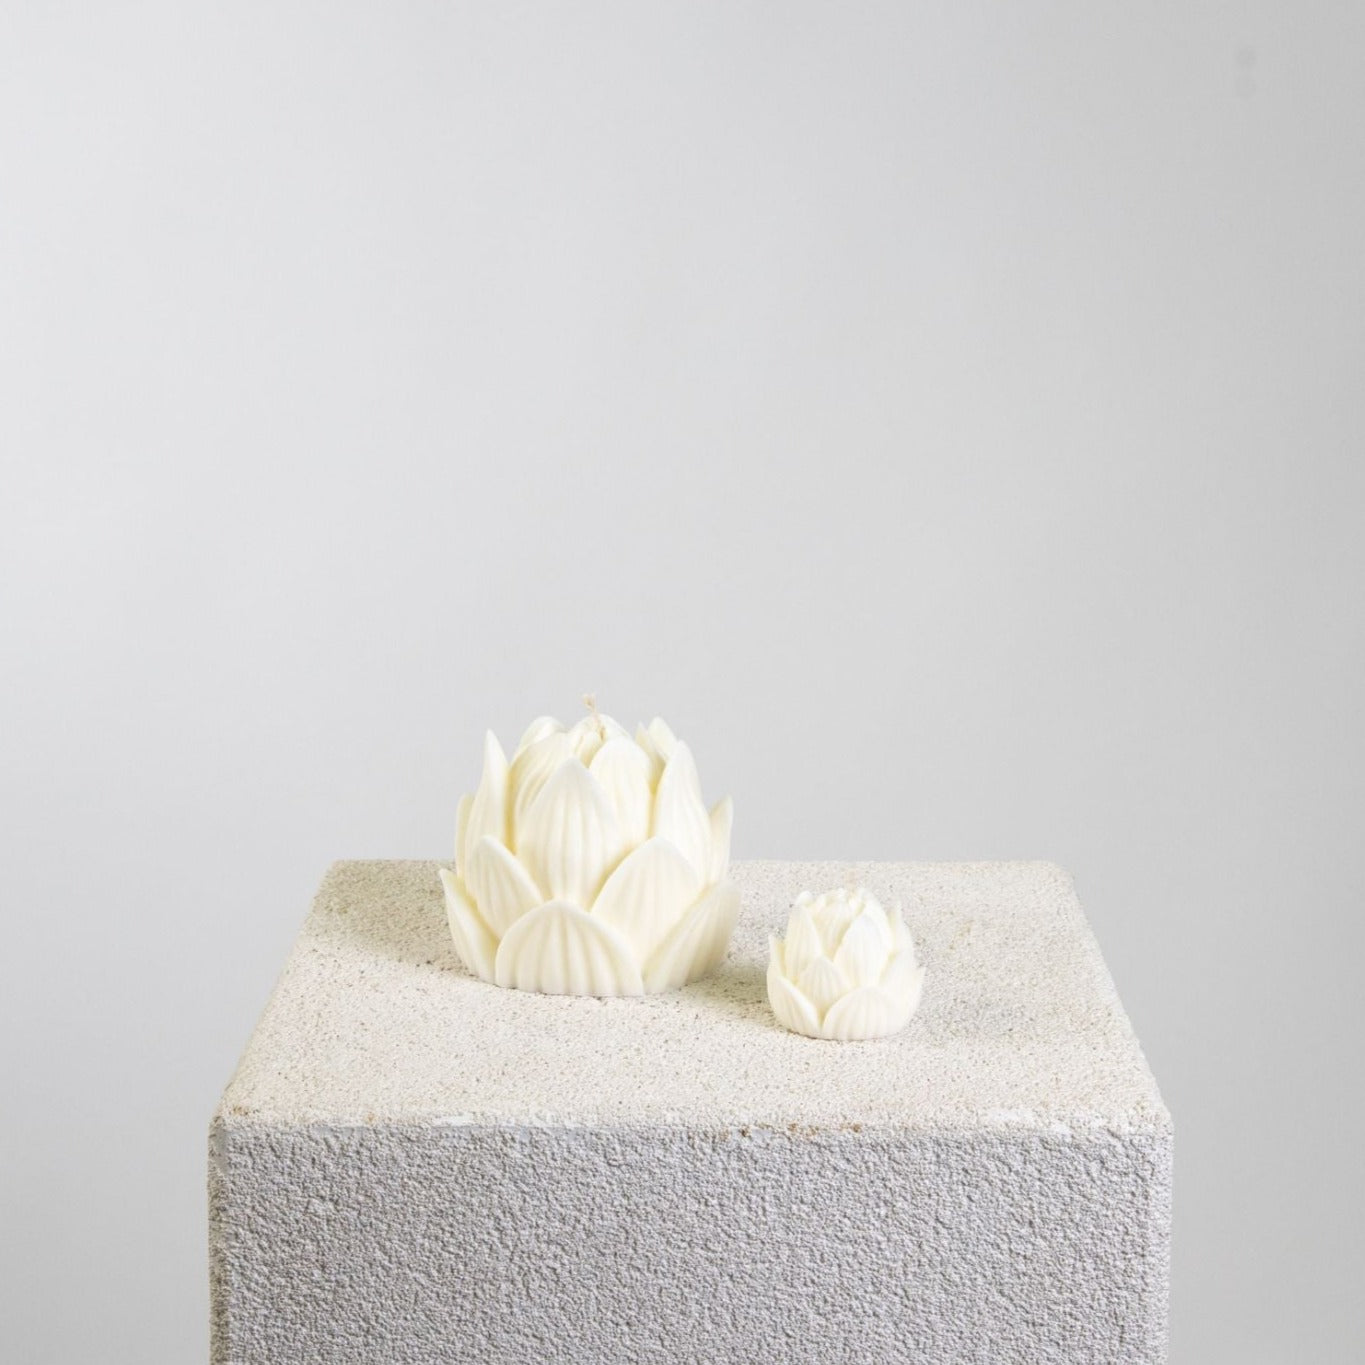 Lotus Sculptural Soy Wax Candle Collection | Candles | Botanic, Candle, Decor | Studio McKenna